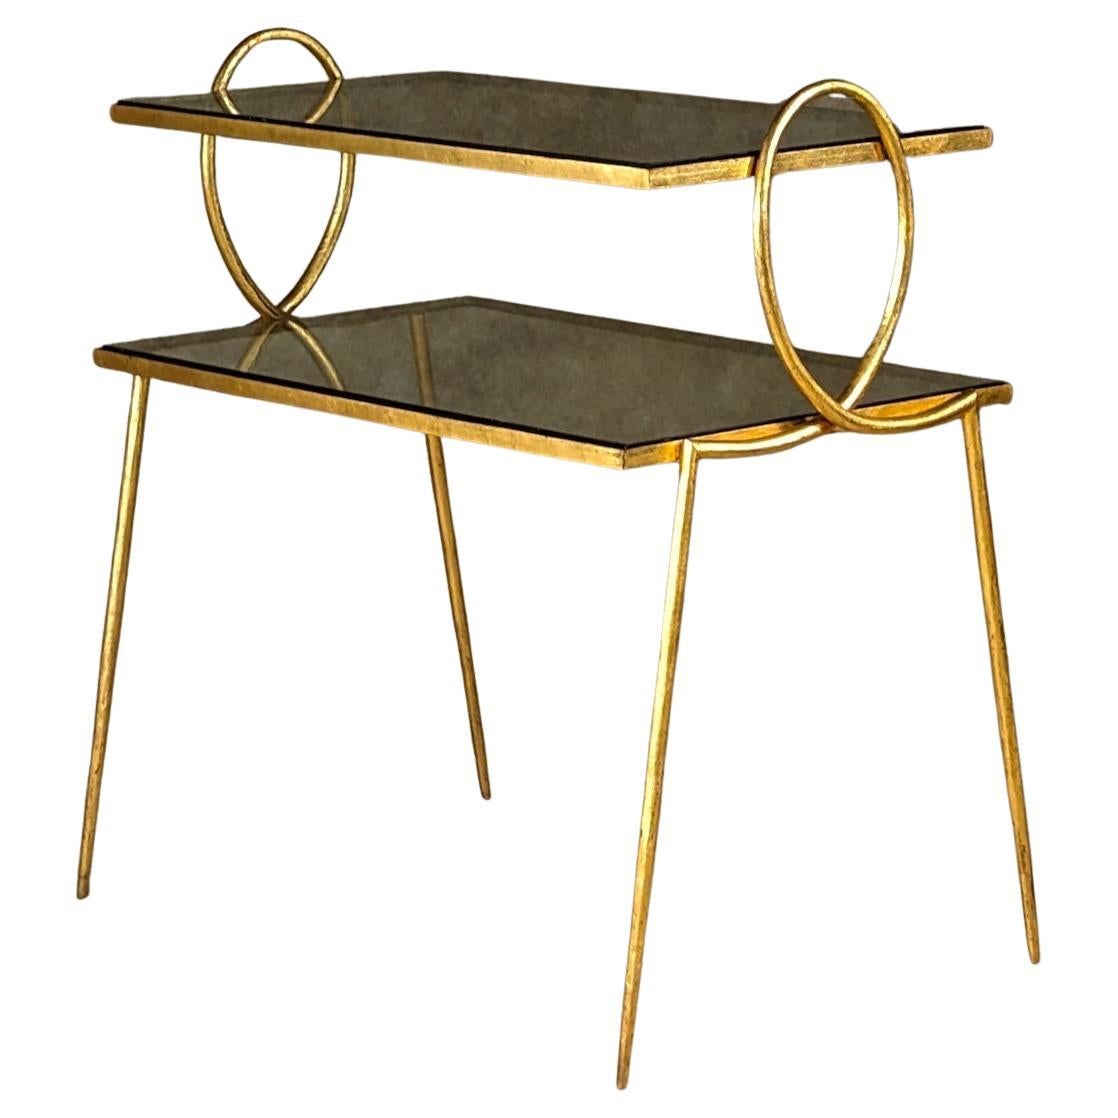 Rene Prou two-tiered table 